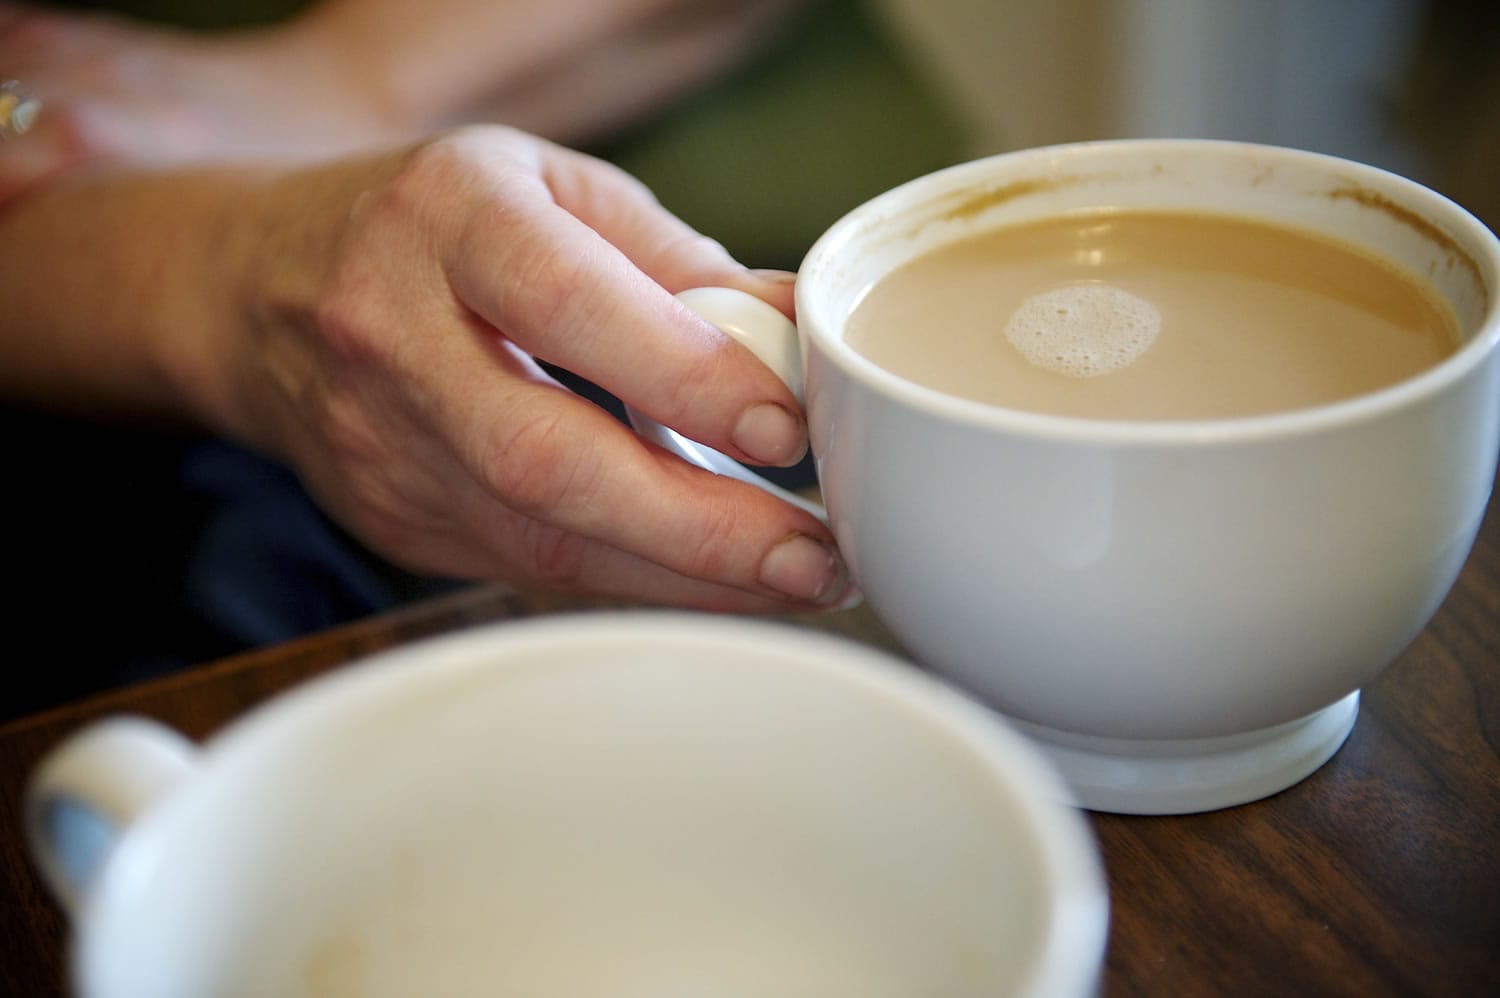 A new study says caffeine may help people forget less.